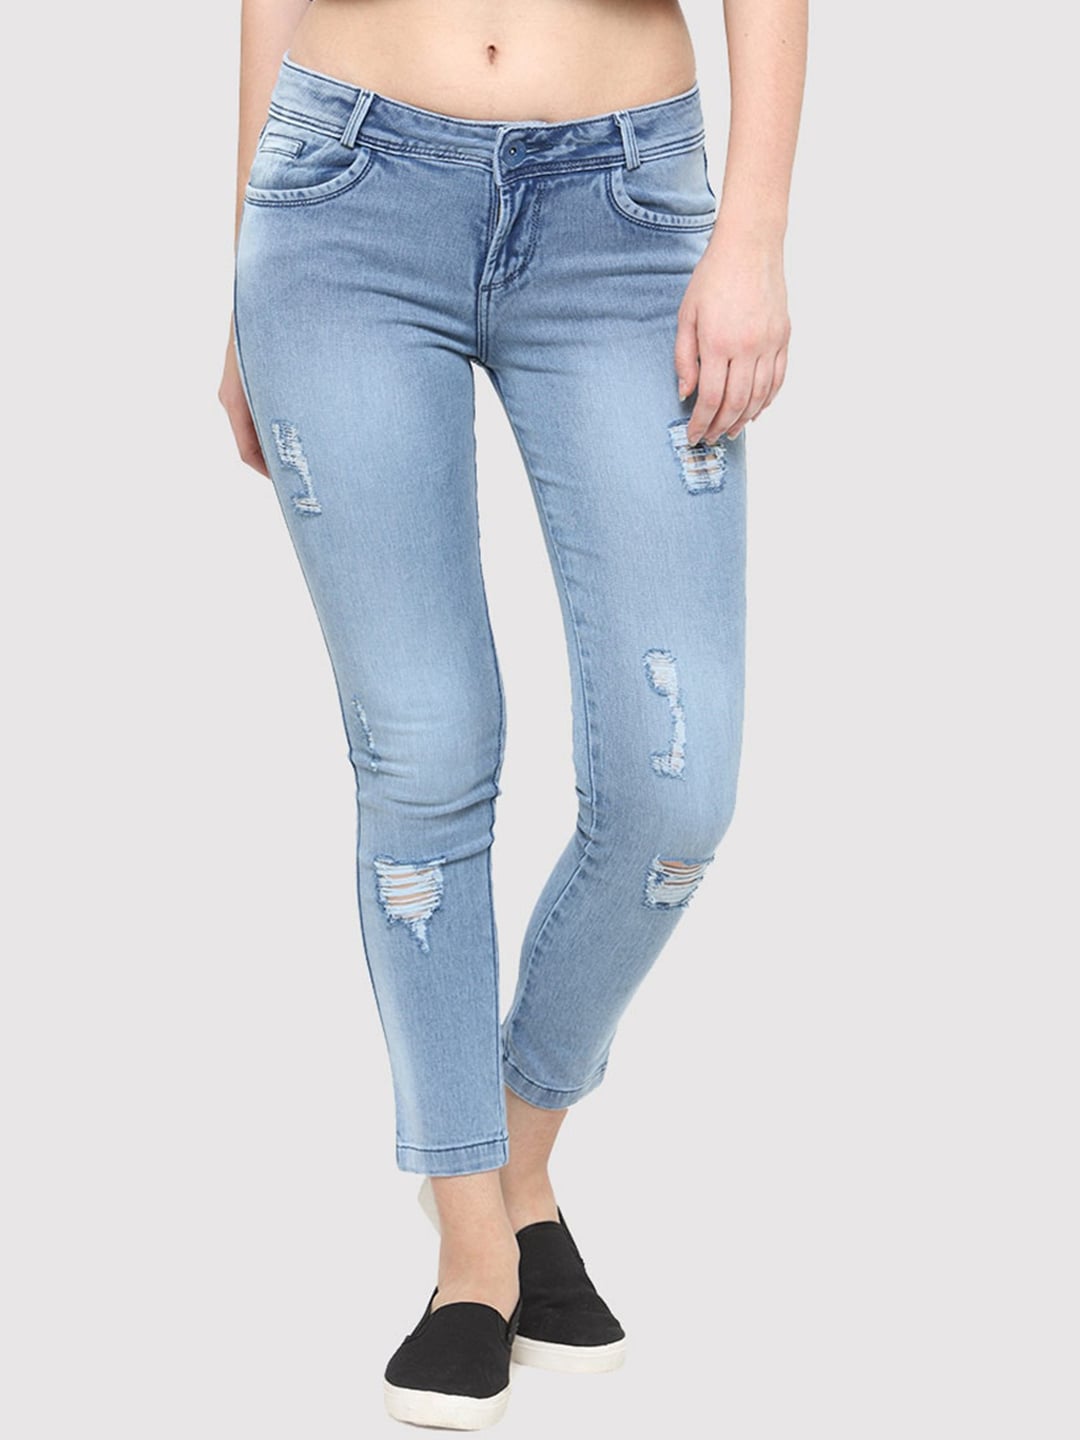 Xpose Women Blue Comfort Slim Fit Mildly Distressed Light Fade Stretchable Jeans Price in India